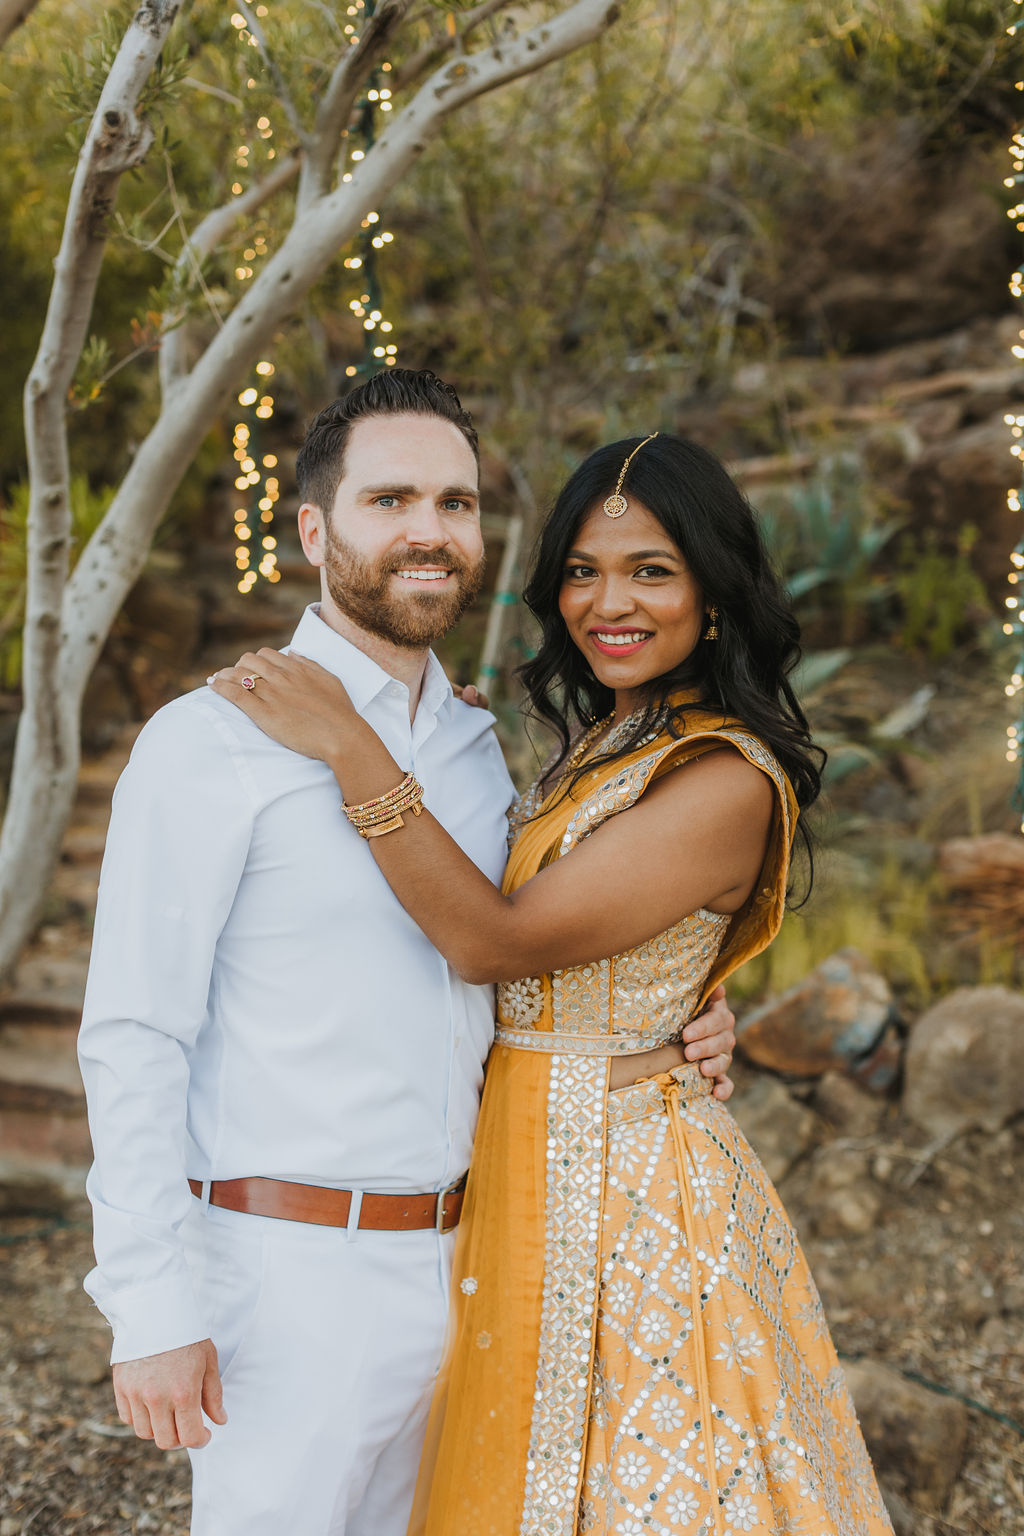 bride in orange sari stands with groom in white during sunset photos at Saddlerock Ranch in Malibu